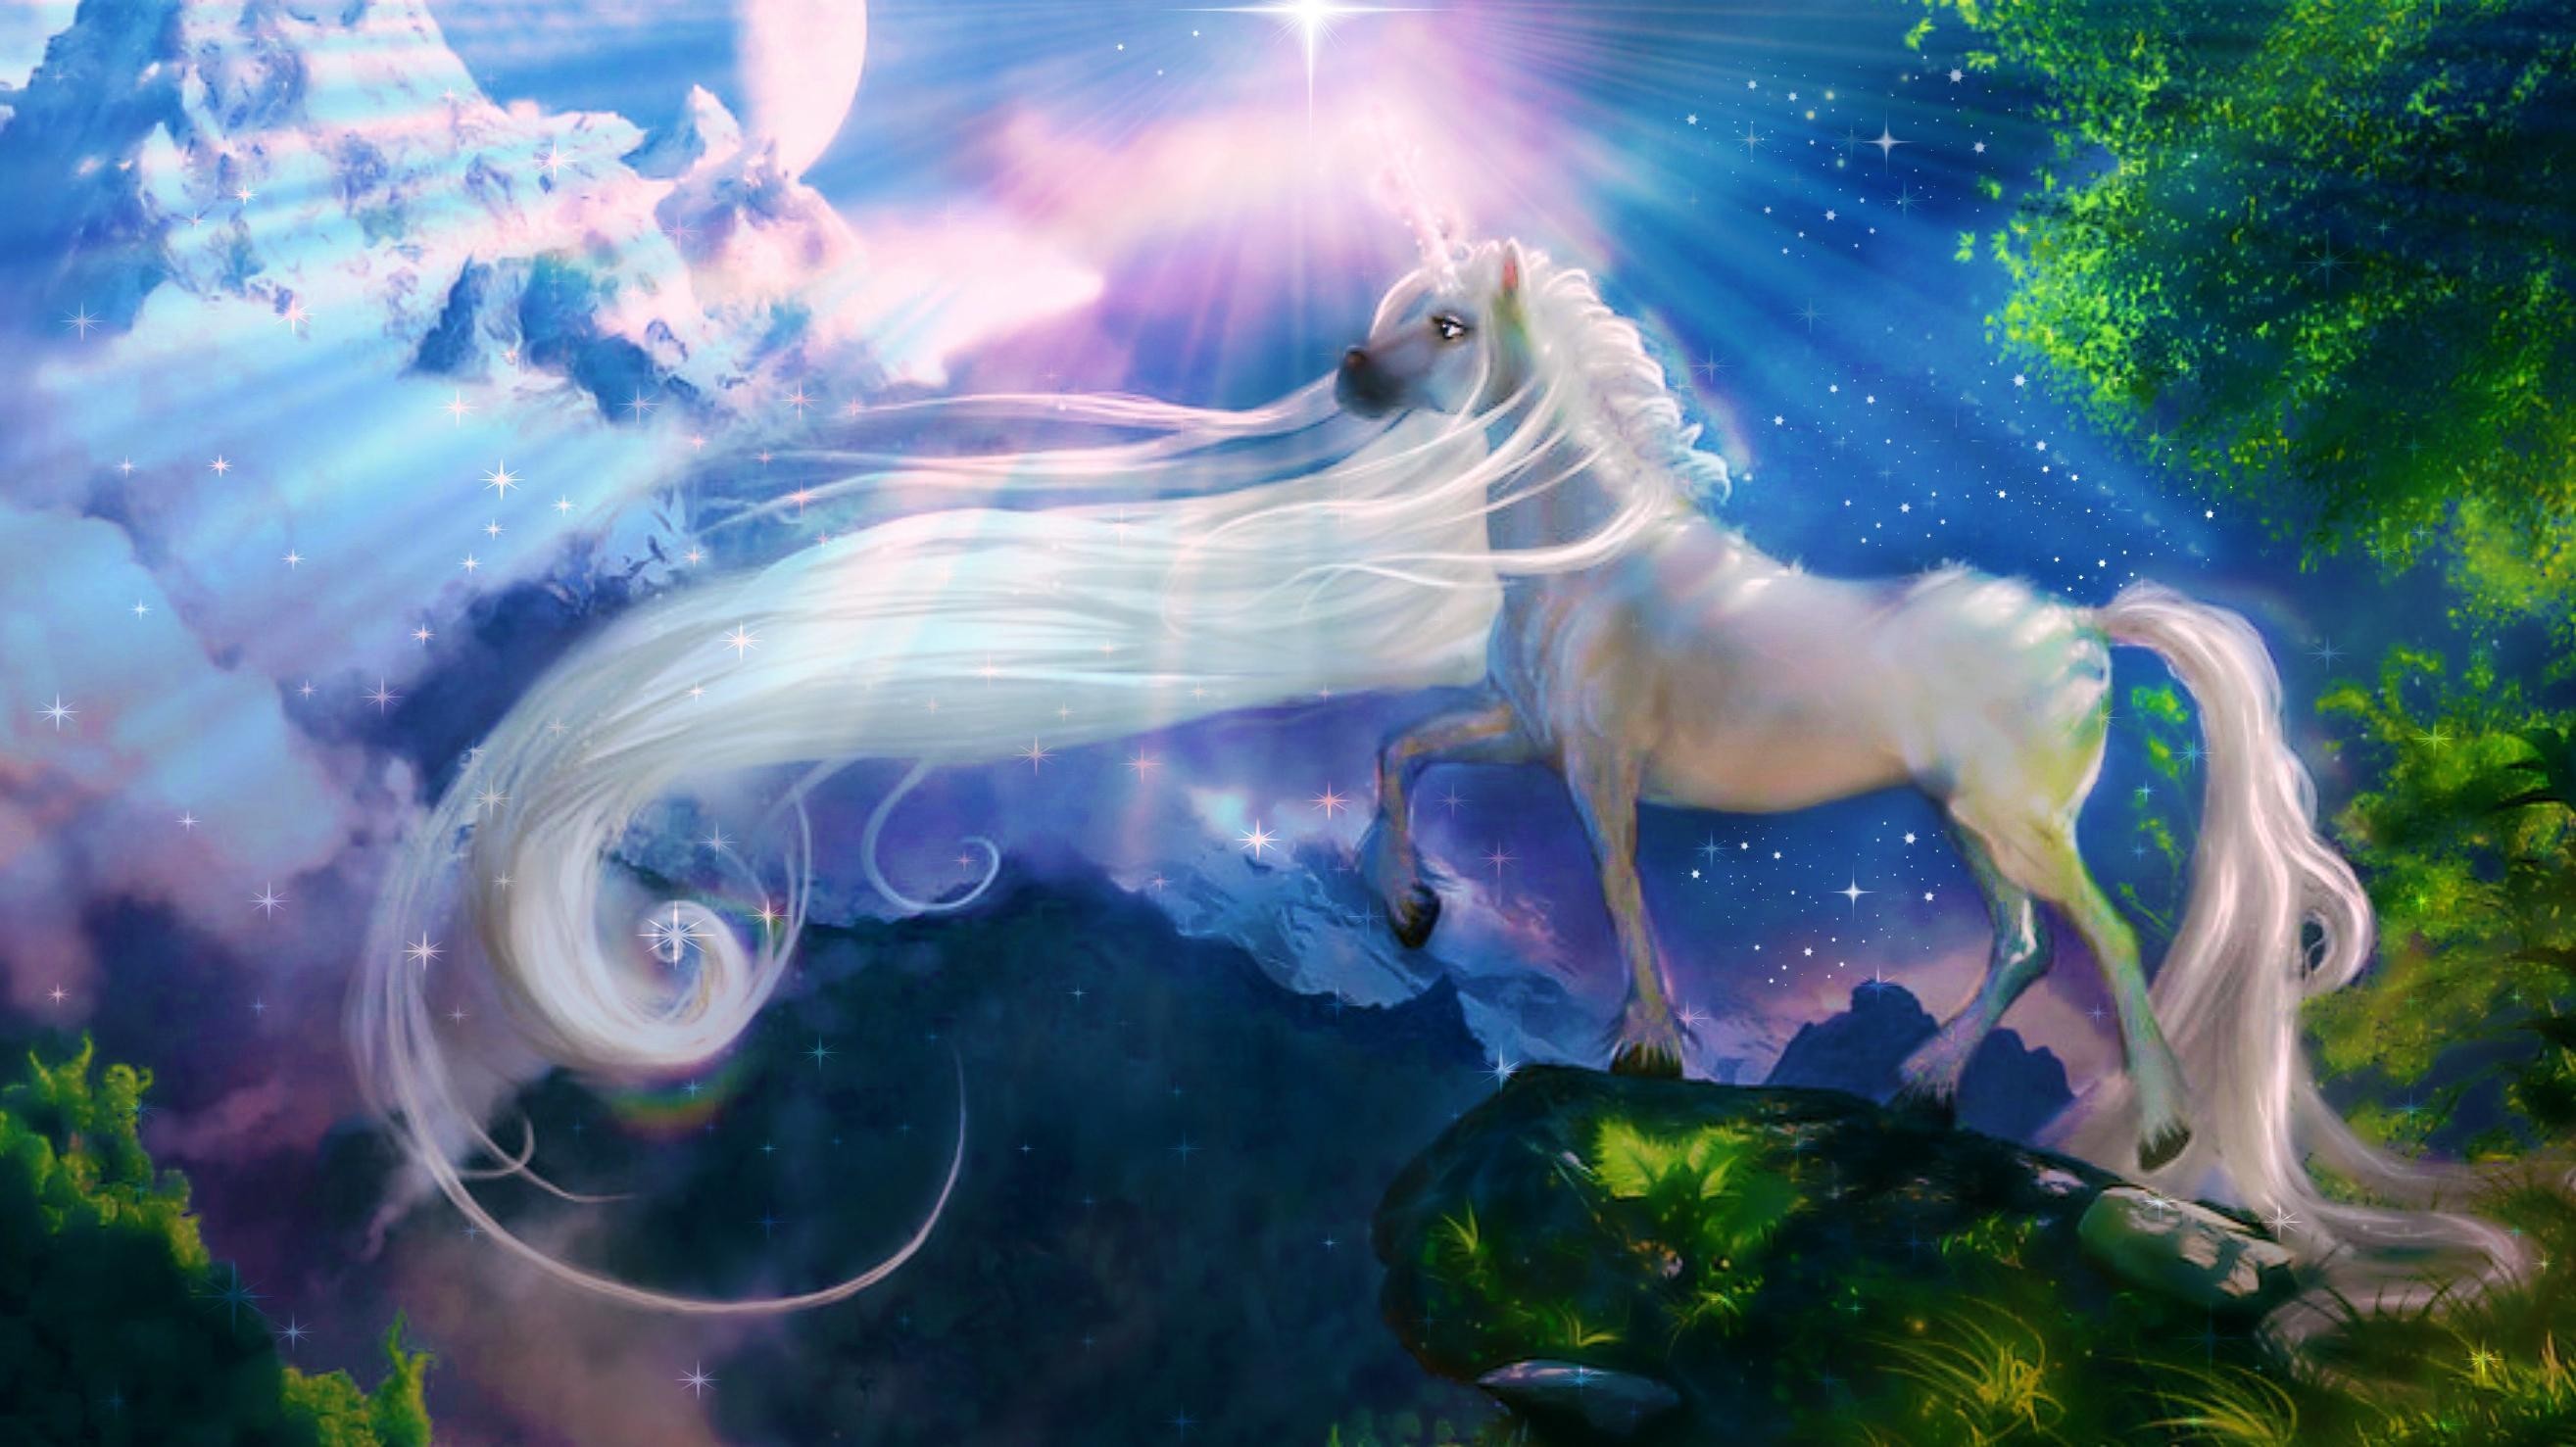 2629x1477  Unicorn fantasy - (#136445) - High Quality and Resolution  Wallpapers .